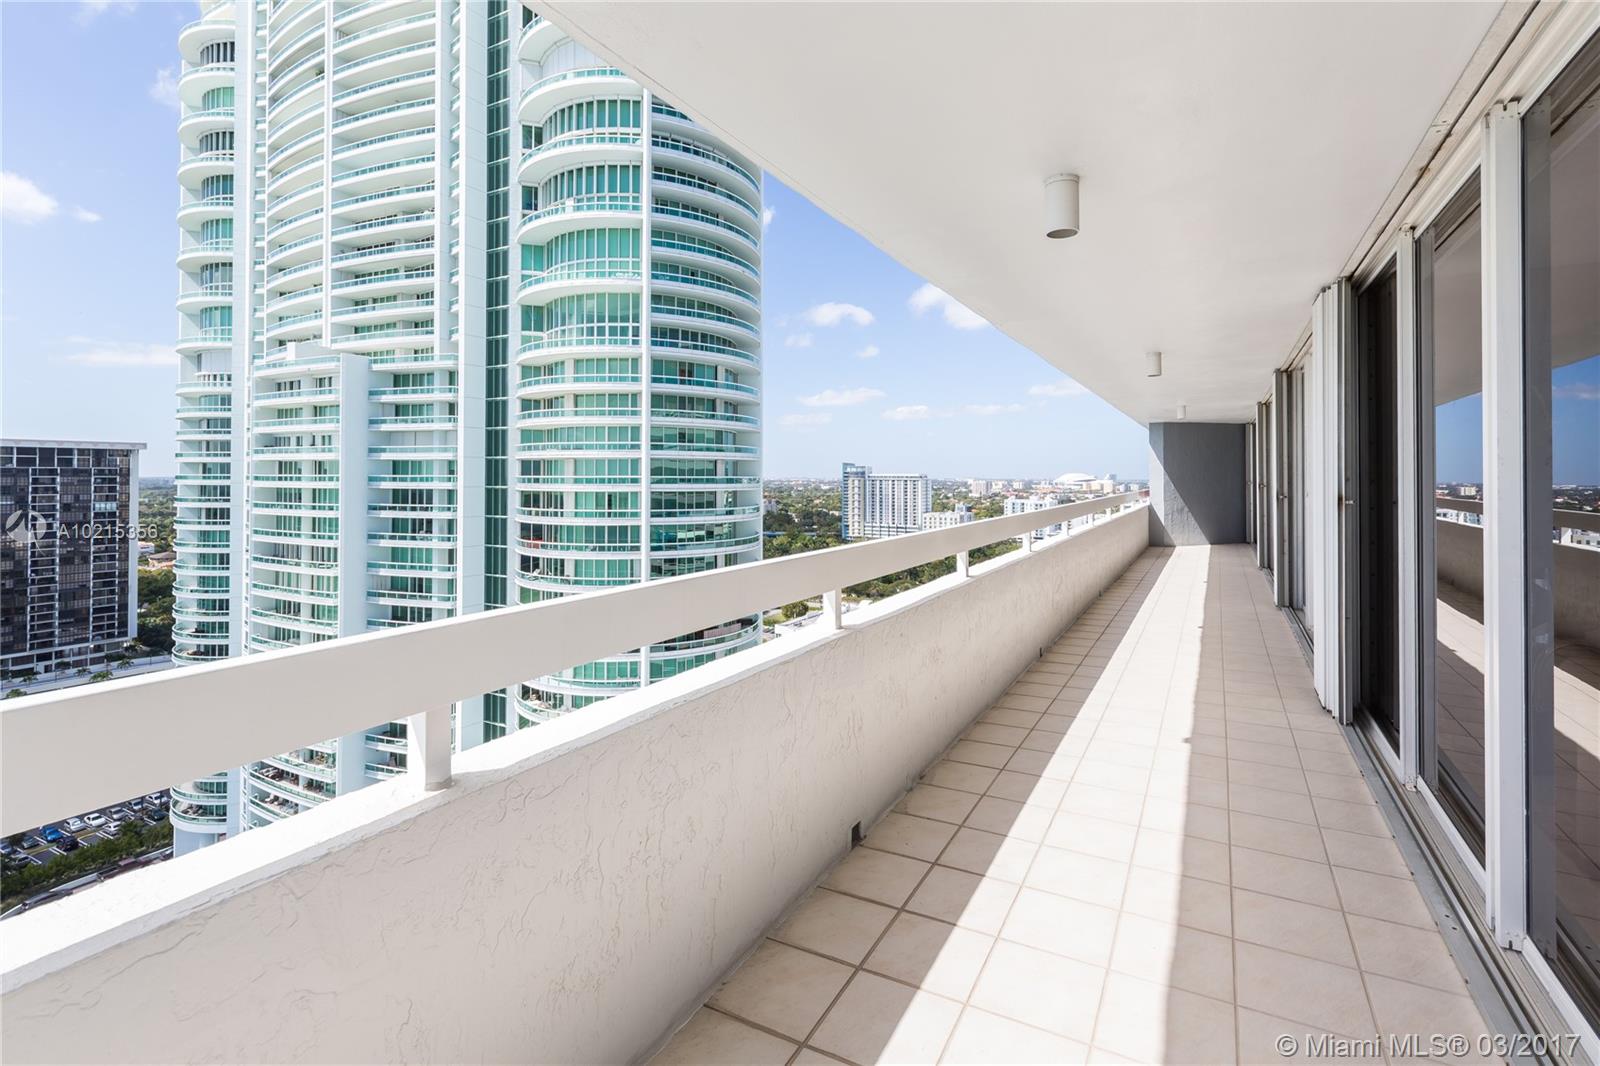 Imperial at Brickell image #29